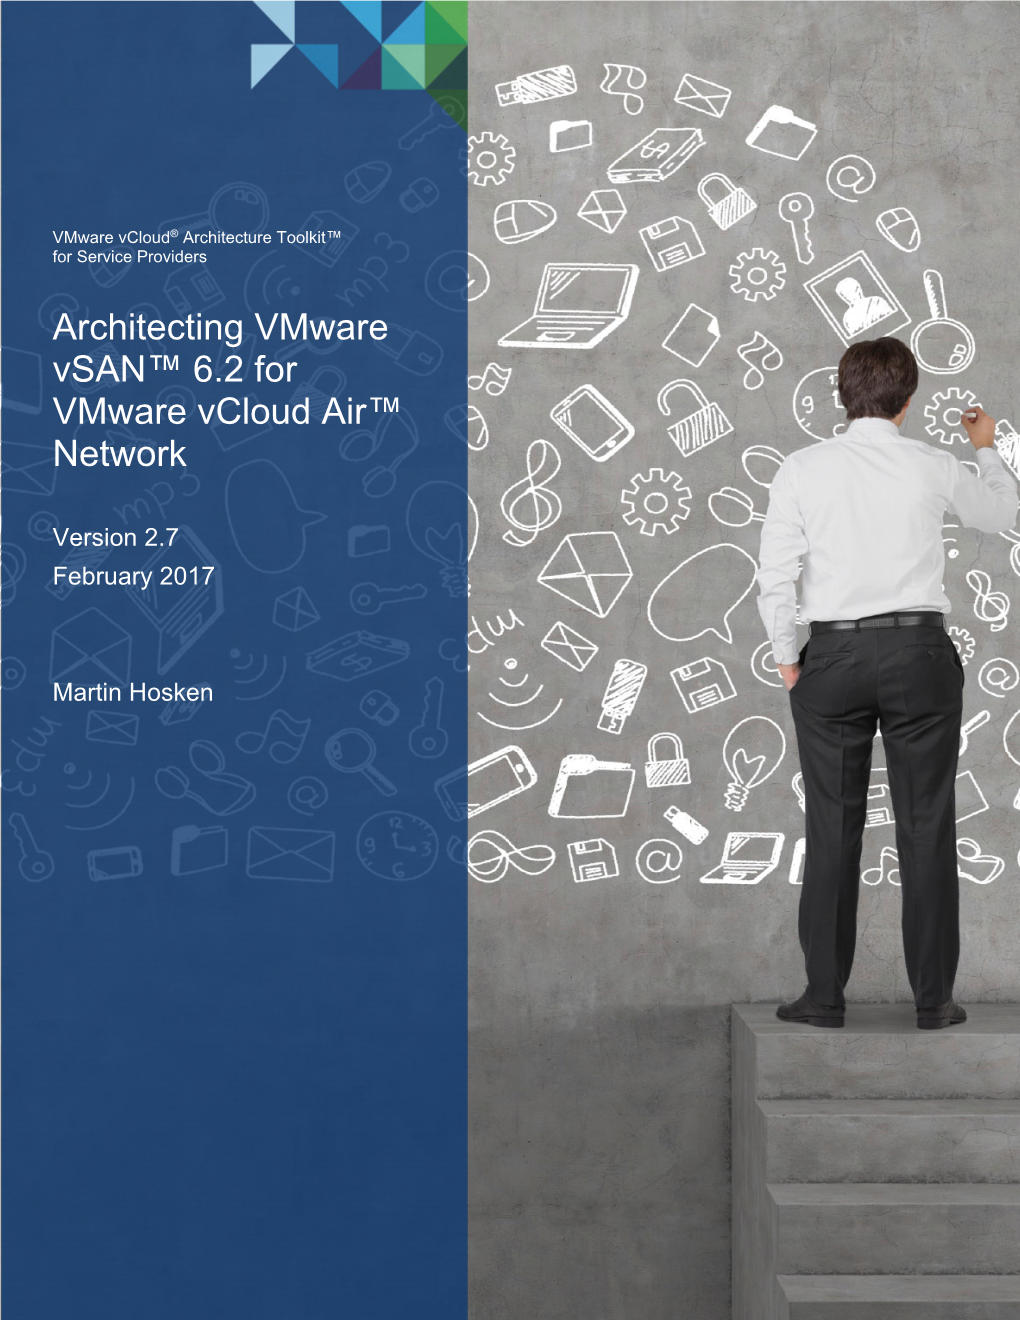 Architecting Vmware Vsan 6.2 for Vmware Vcloud Air Network